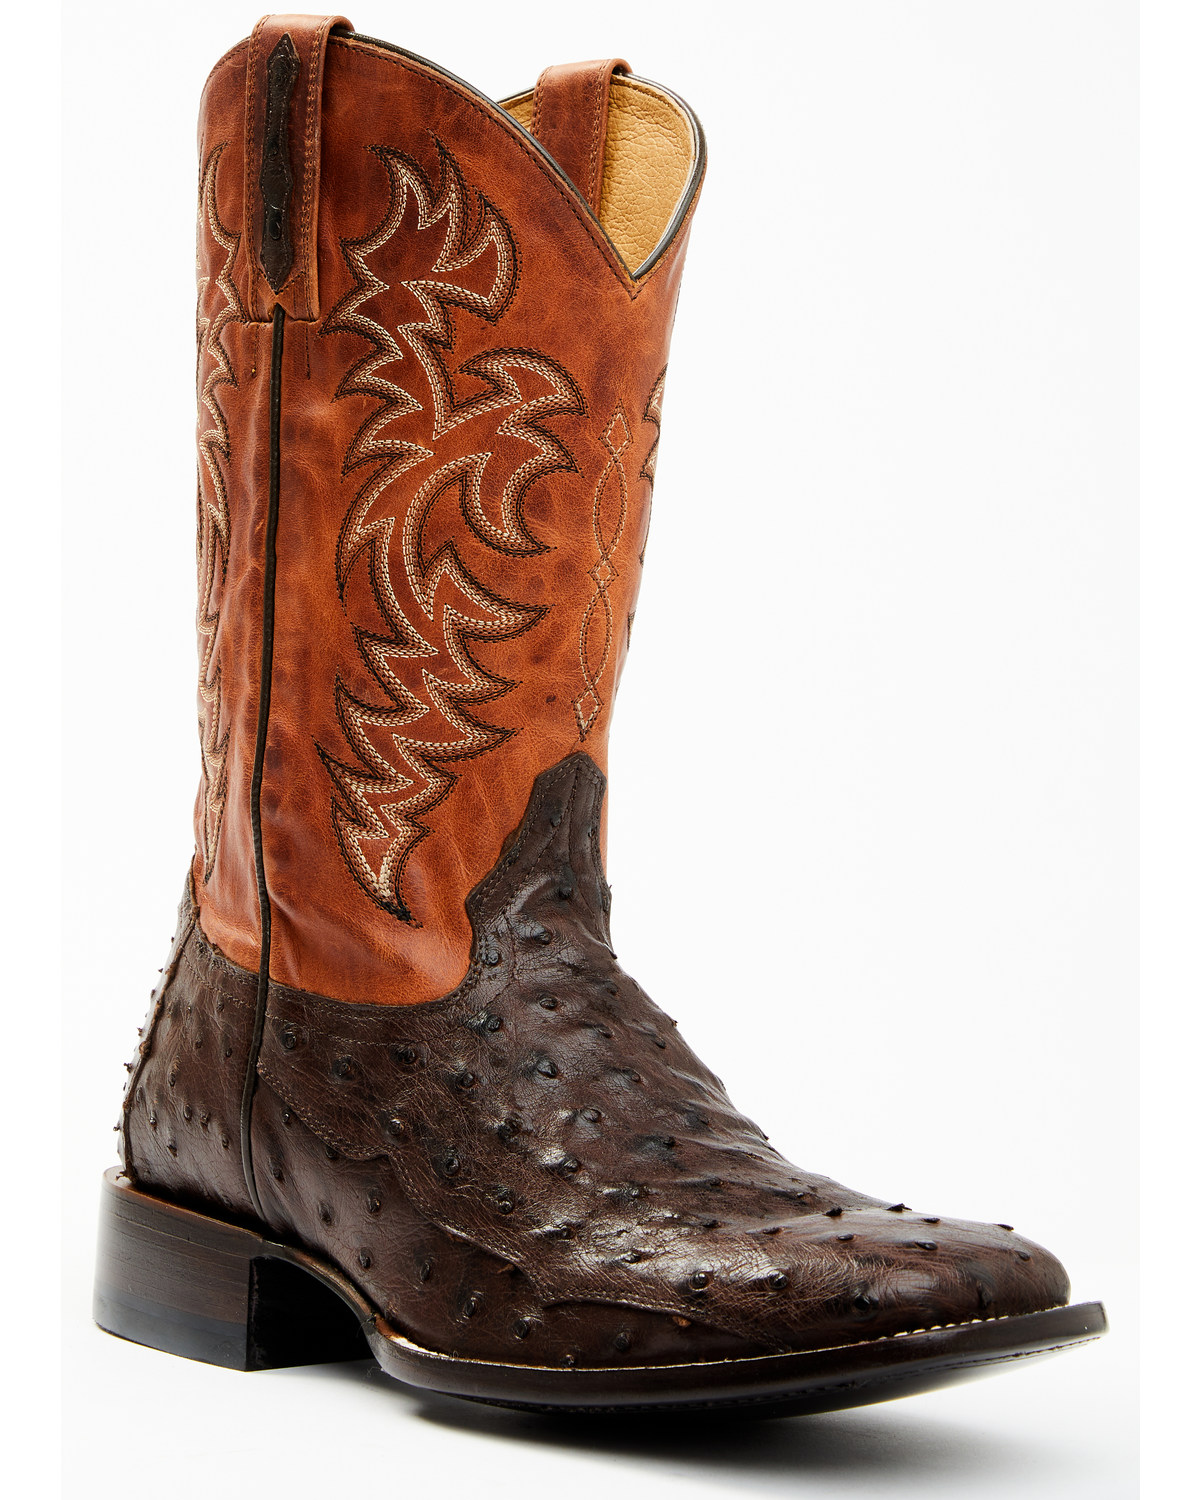 Cody James Men's Sienna Genuine Ostrich Exotic Western Boots - Broad Square Toe